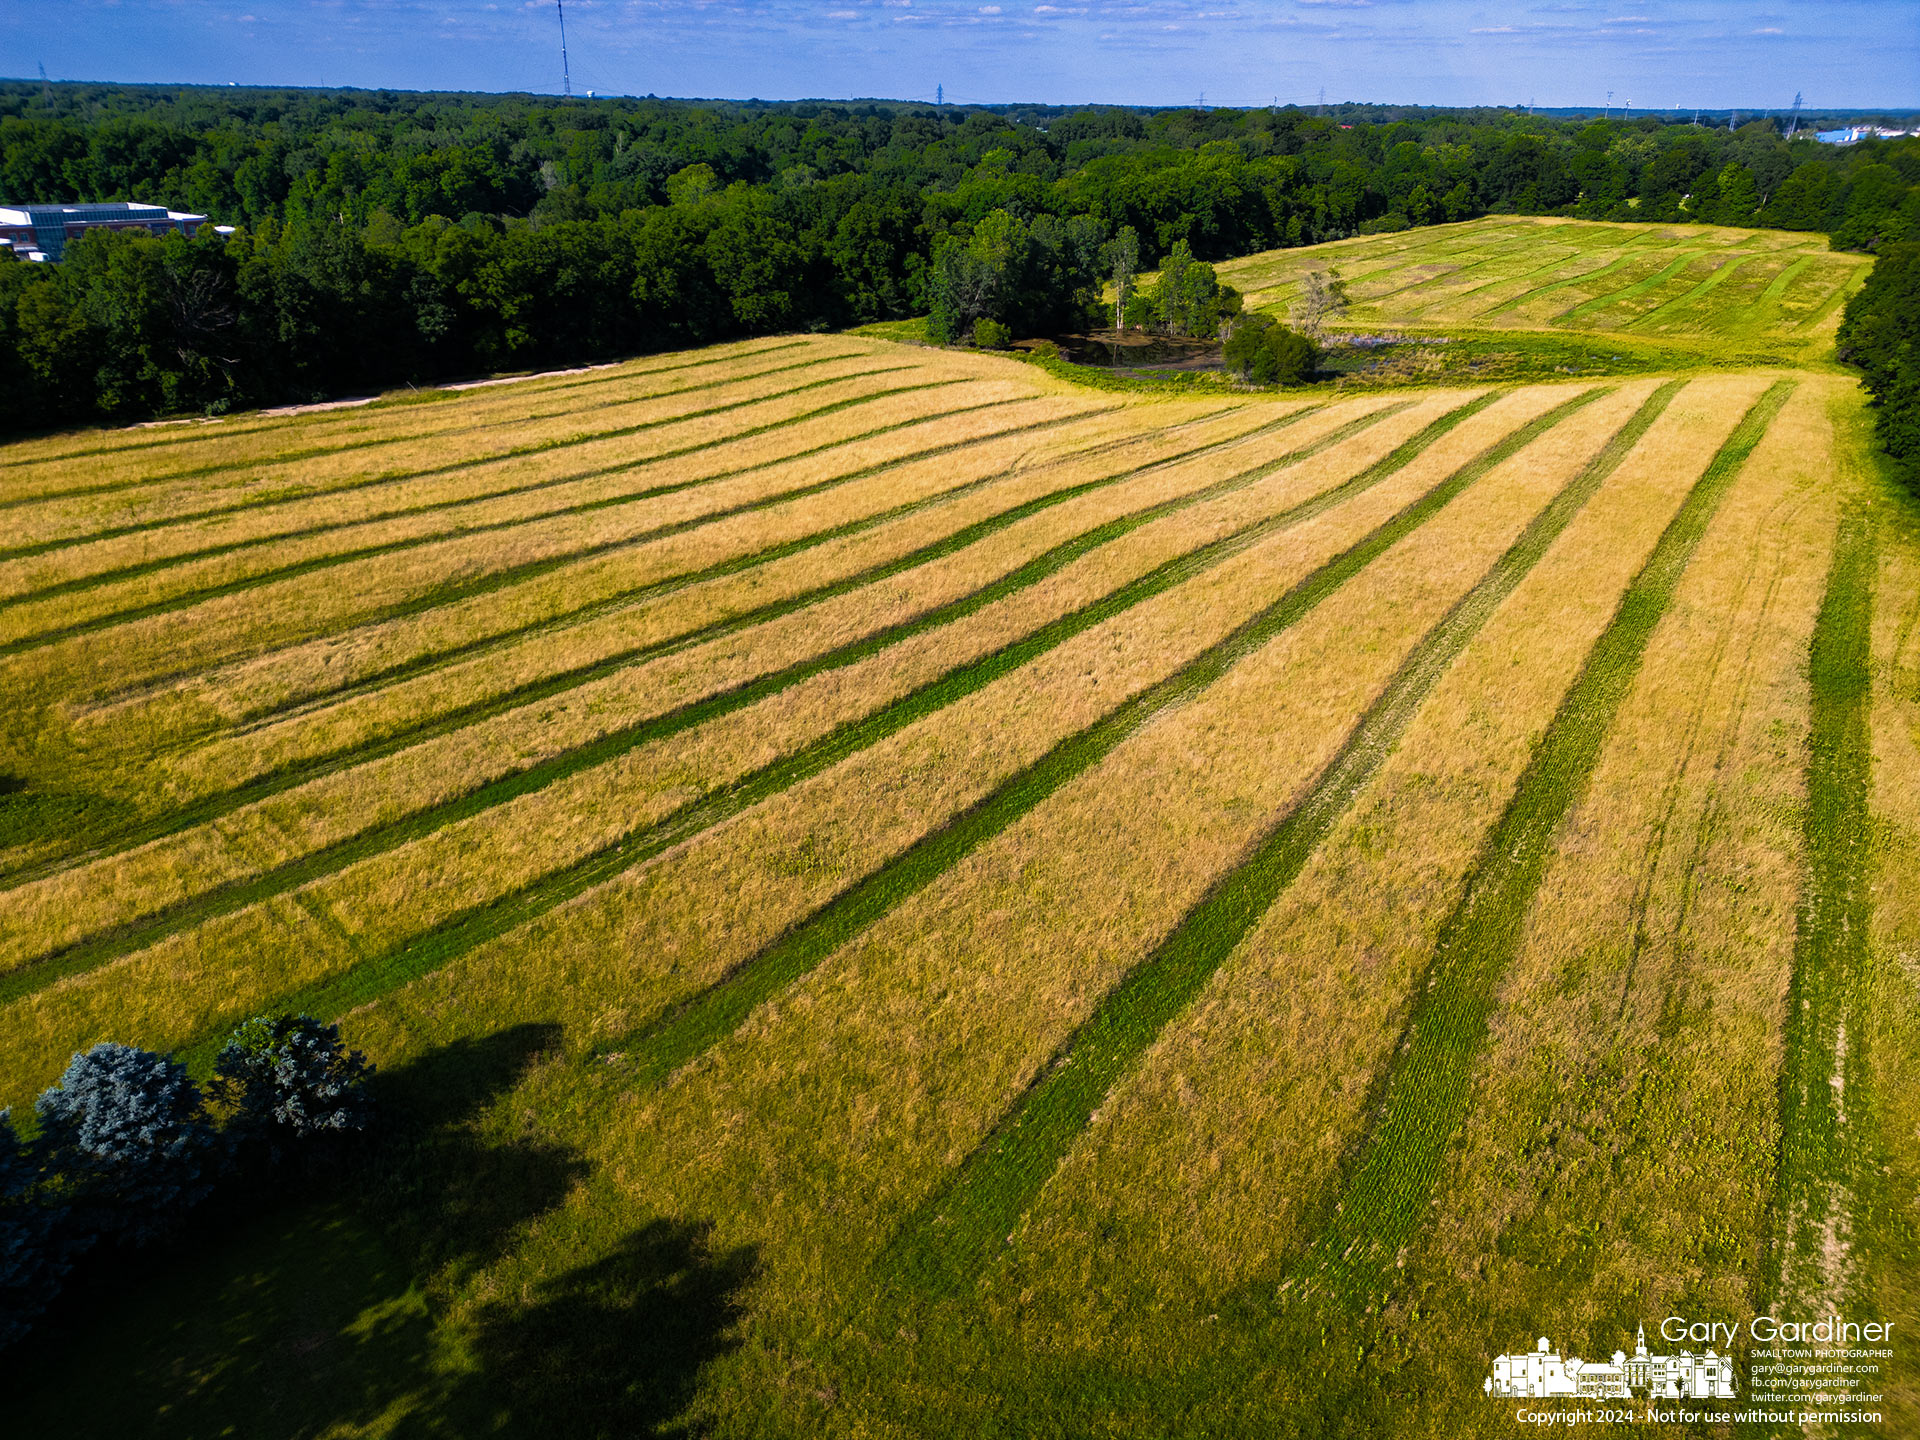 Stripes of green freshly planted grasses between aged hay mark sections of the Sharp Farm hayfield which was recently tilled for soil studies on the land the city purchased more than a year ago for development. My Final Photo for June 11, 2024.